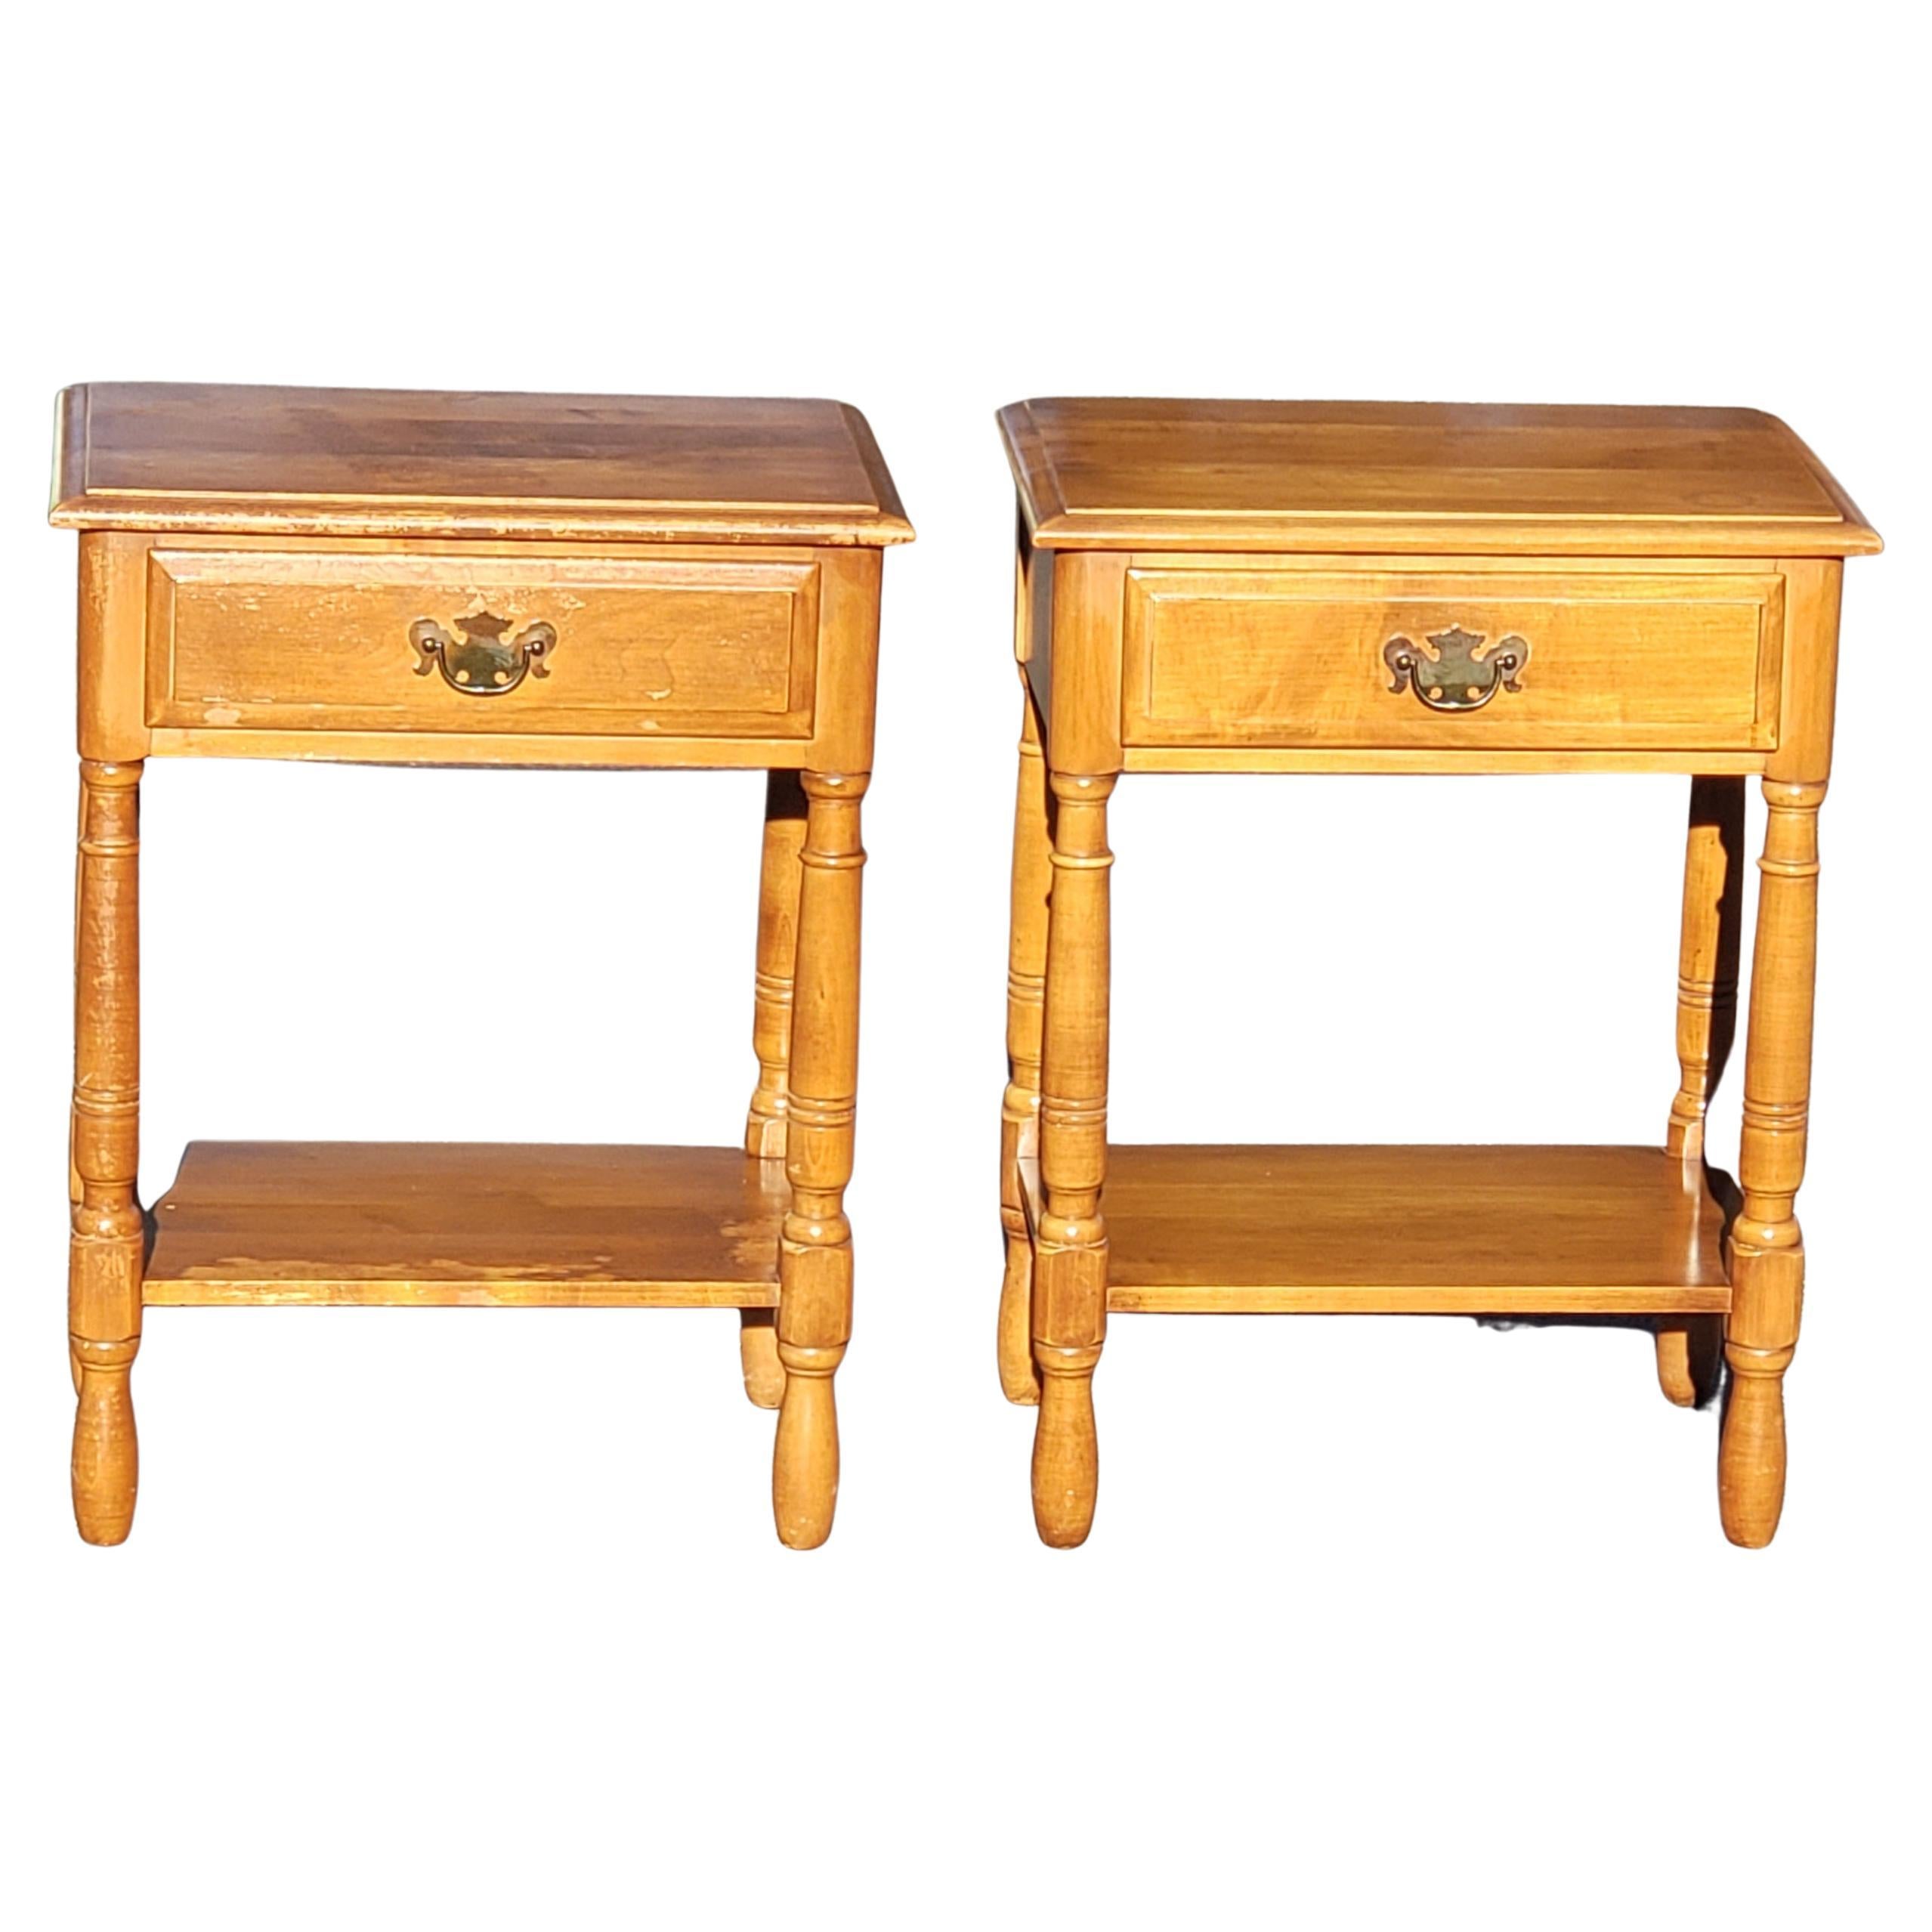 20th Century 1950s Kling Solid Maple American Colonial Side Table Nighstands a Pair For Sale